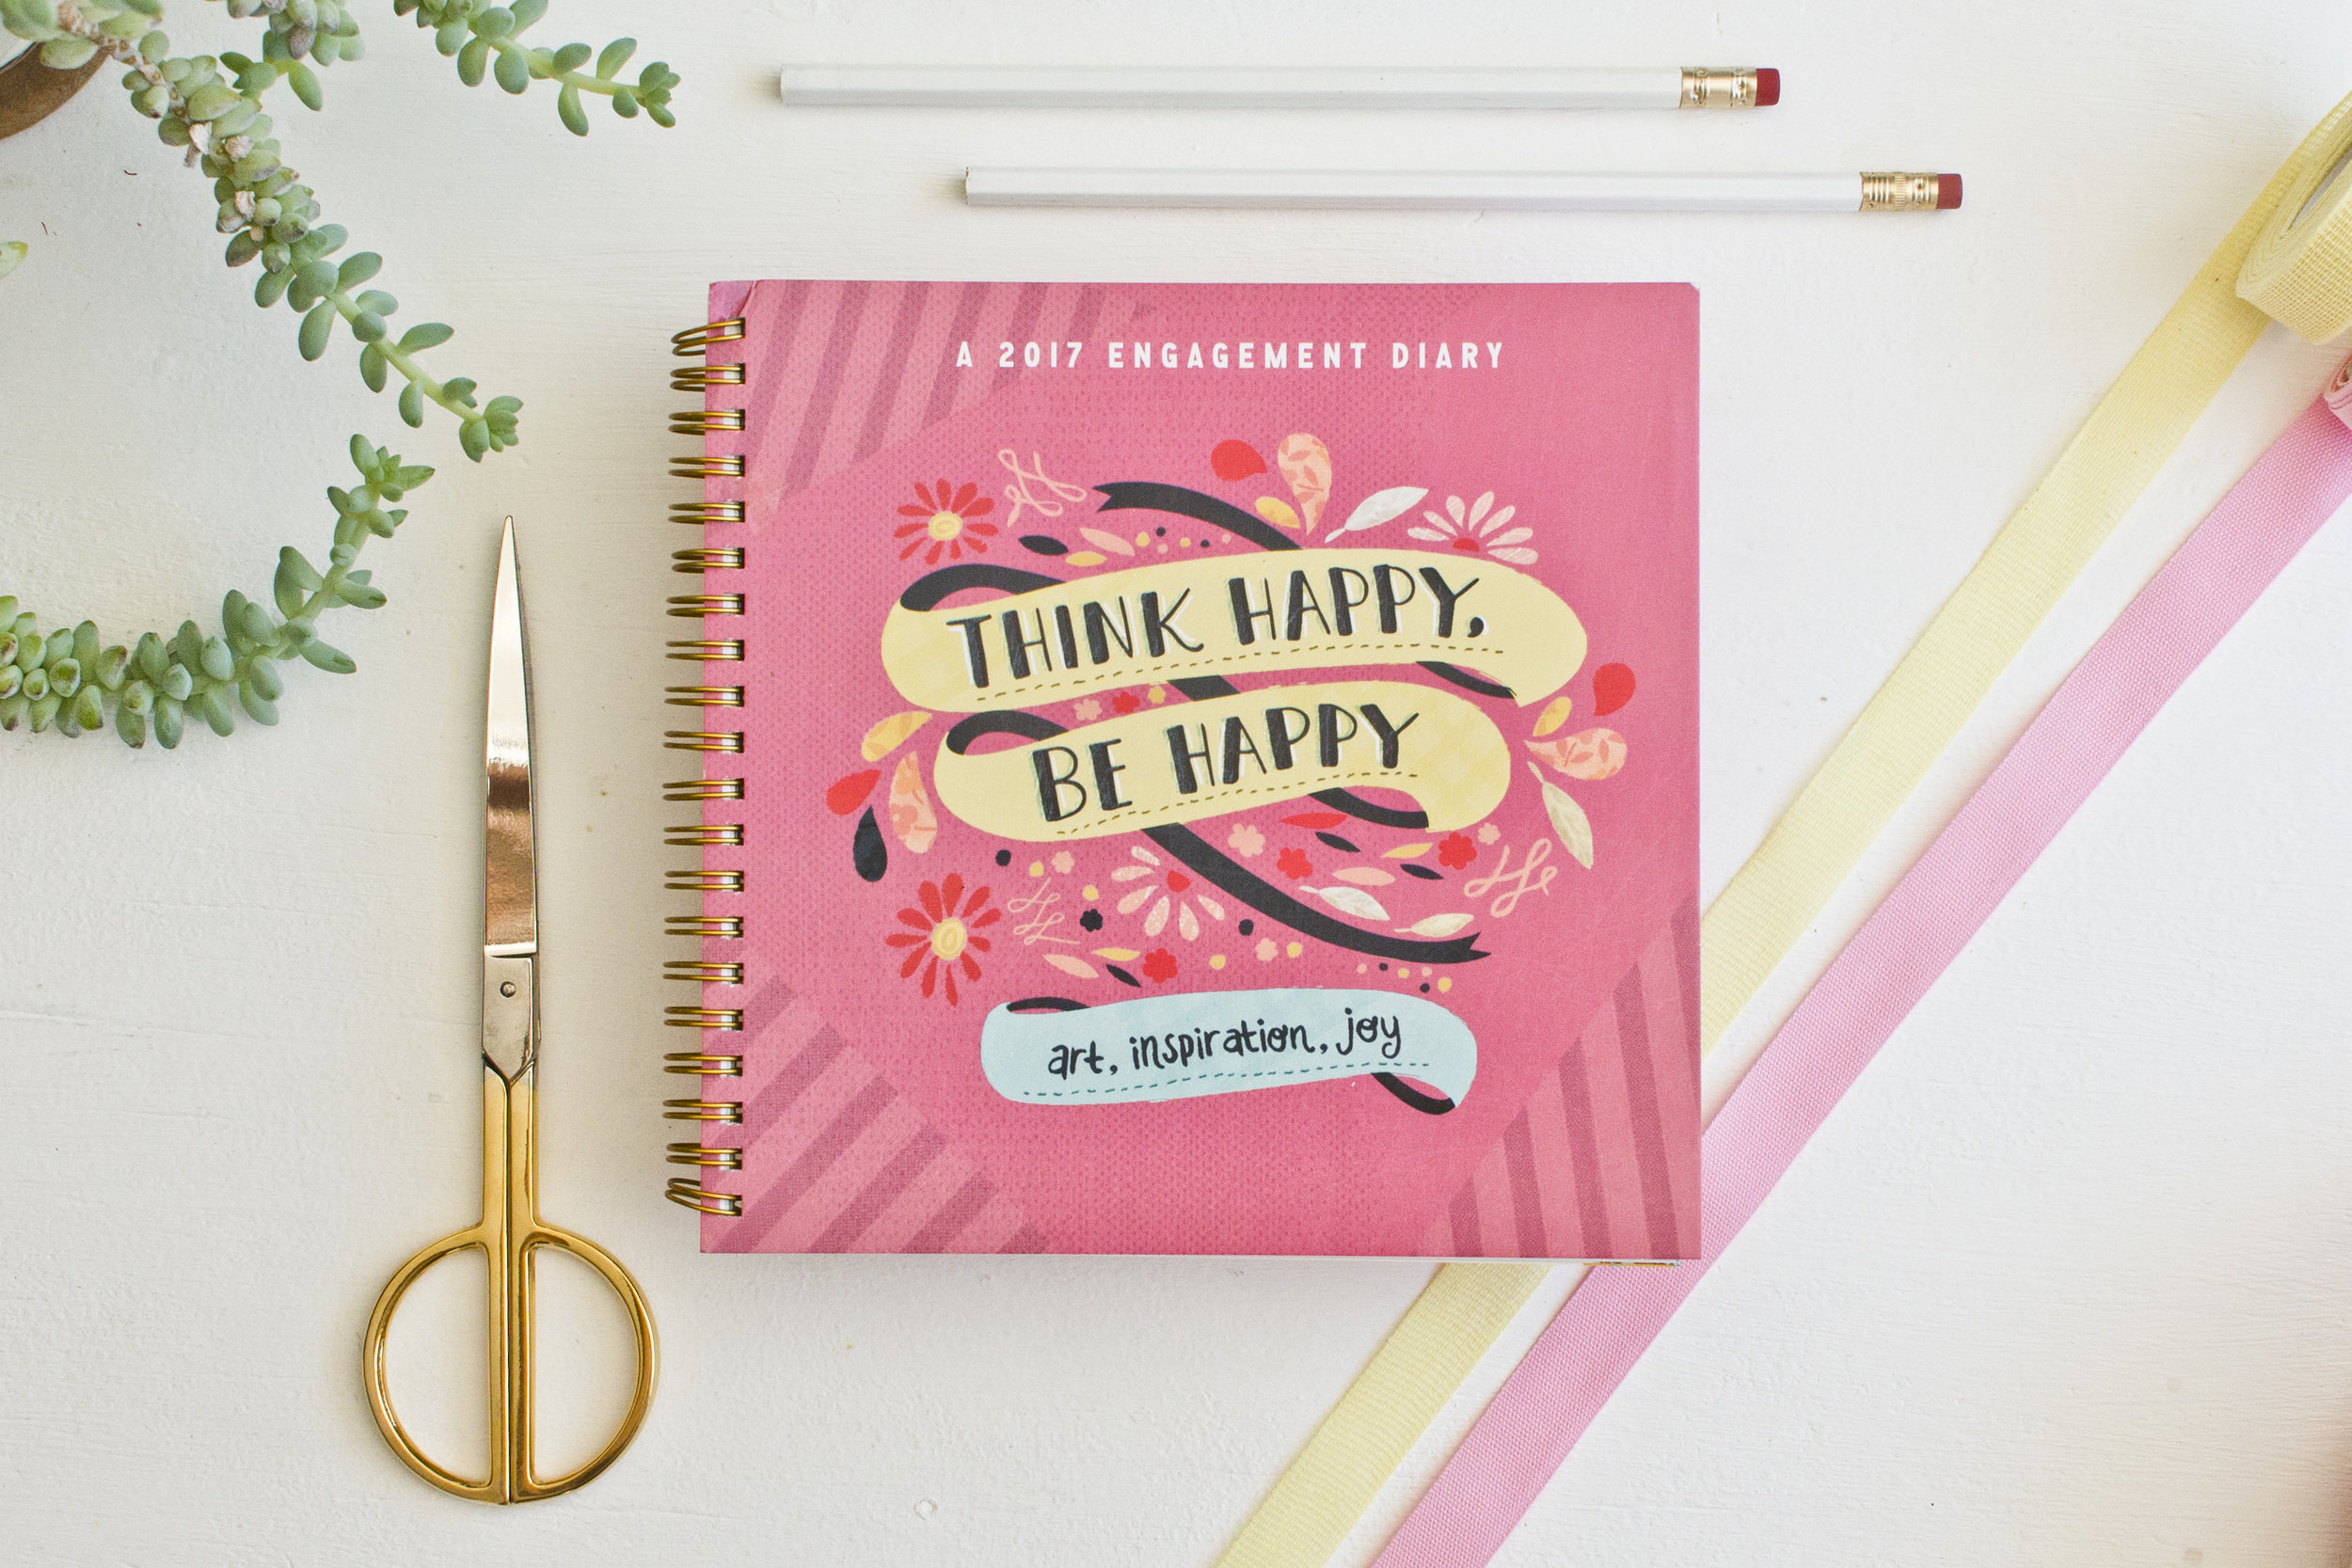 Workman Publishing 2017 Planner-Photo by Becca Cahan as seen on Beccacahan.com